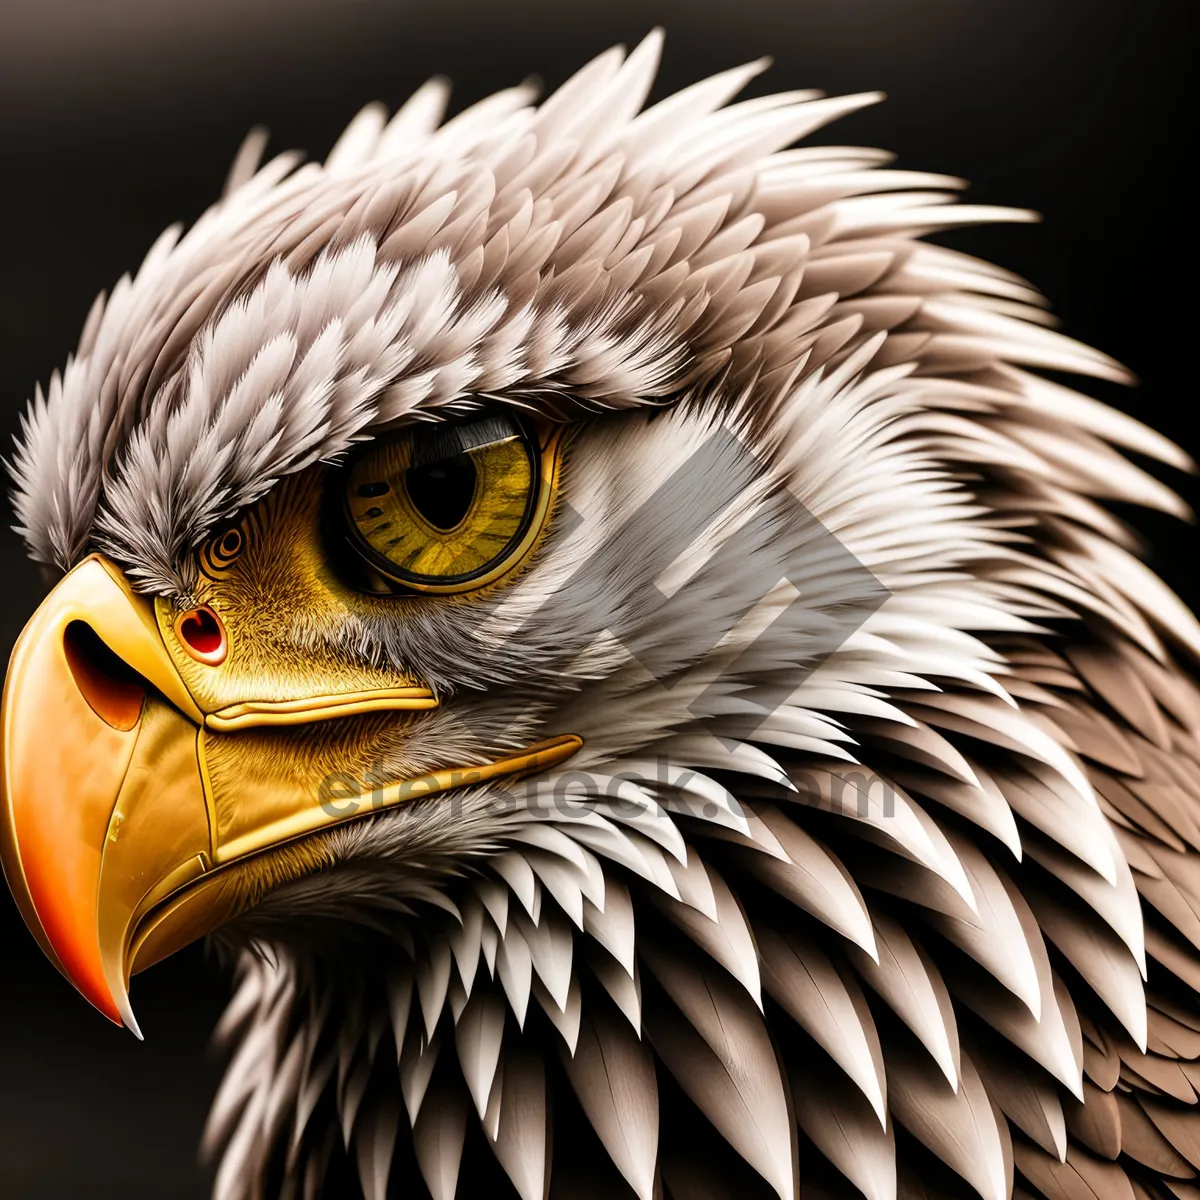 Picture of Bold Bald Eagle Close-Up: Majestic Predator with Piercing Eyes.